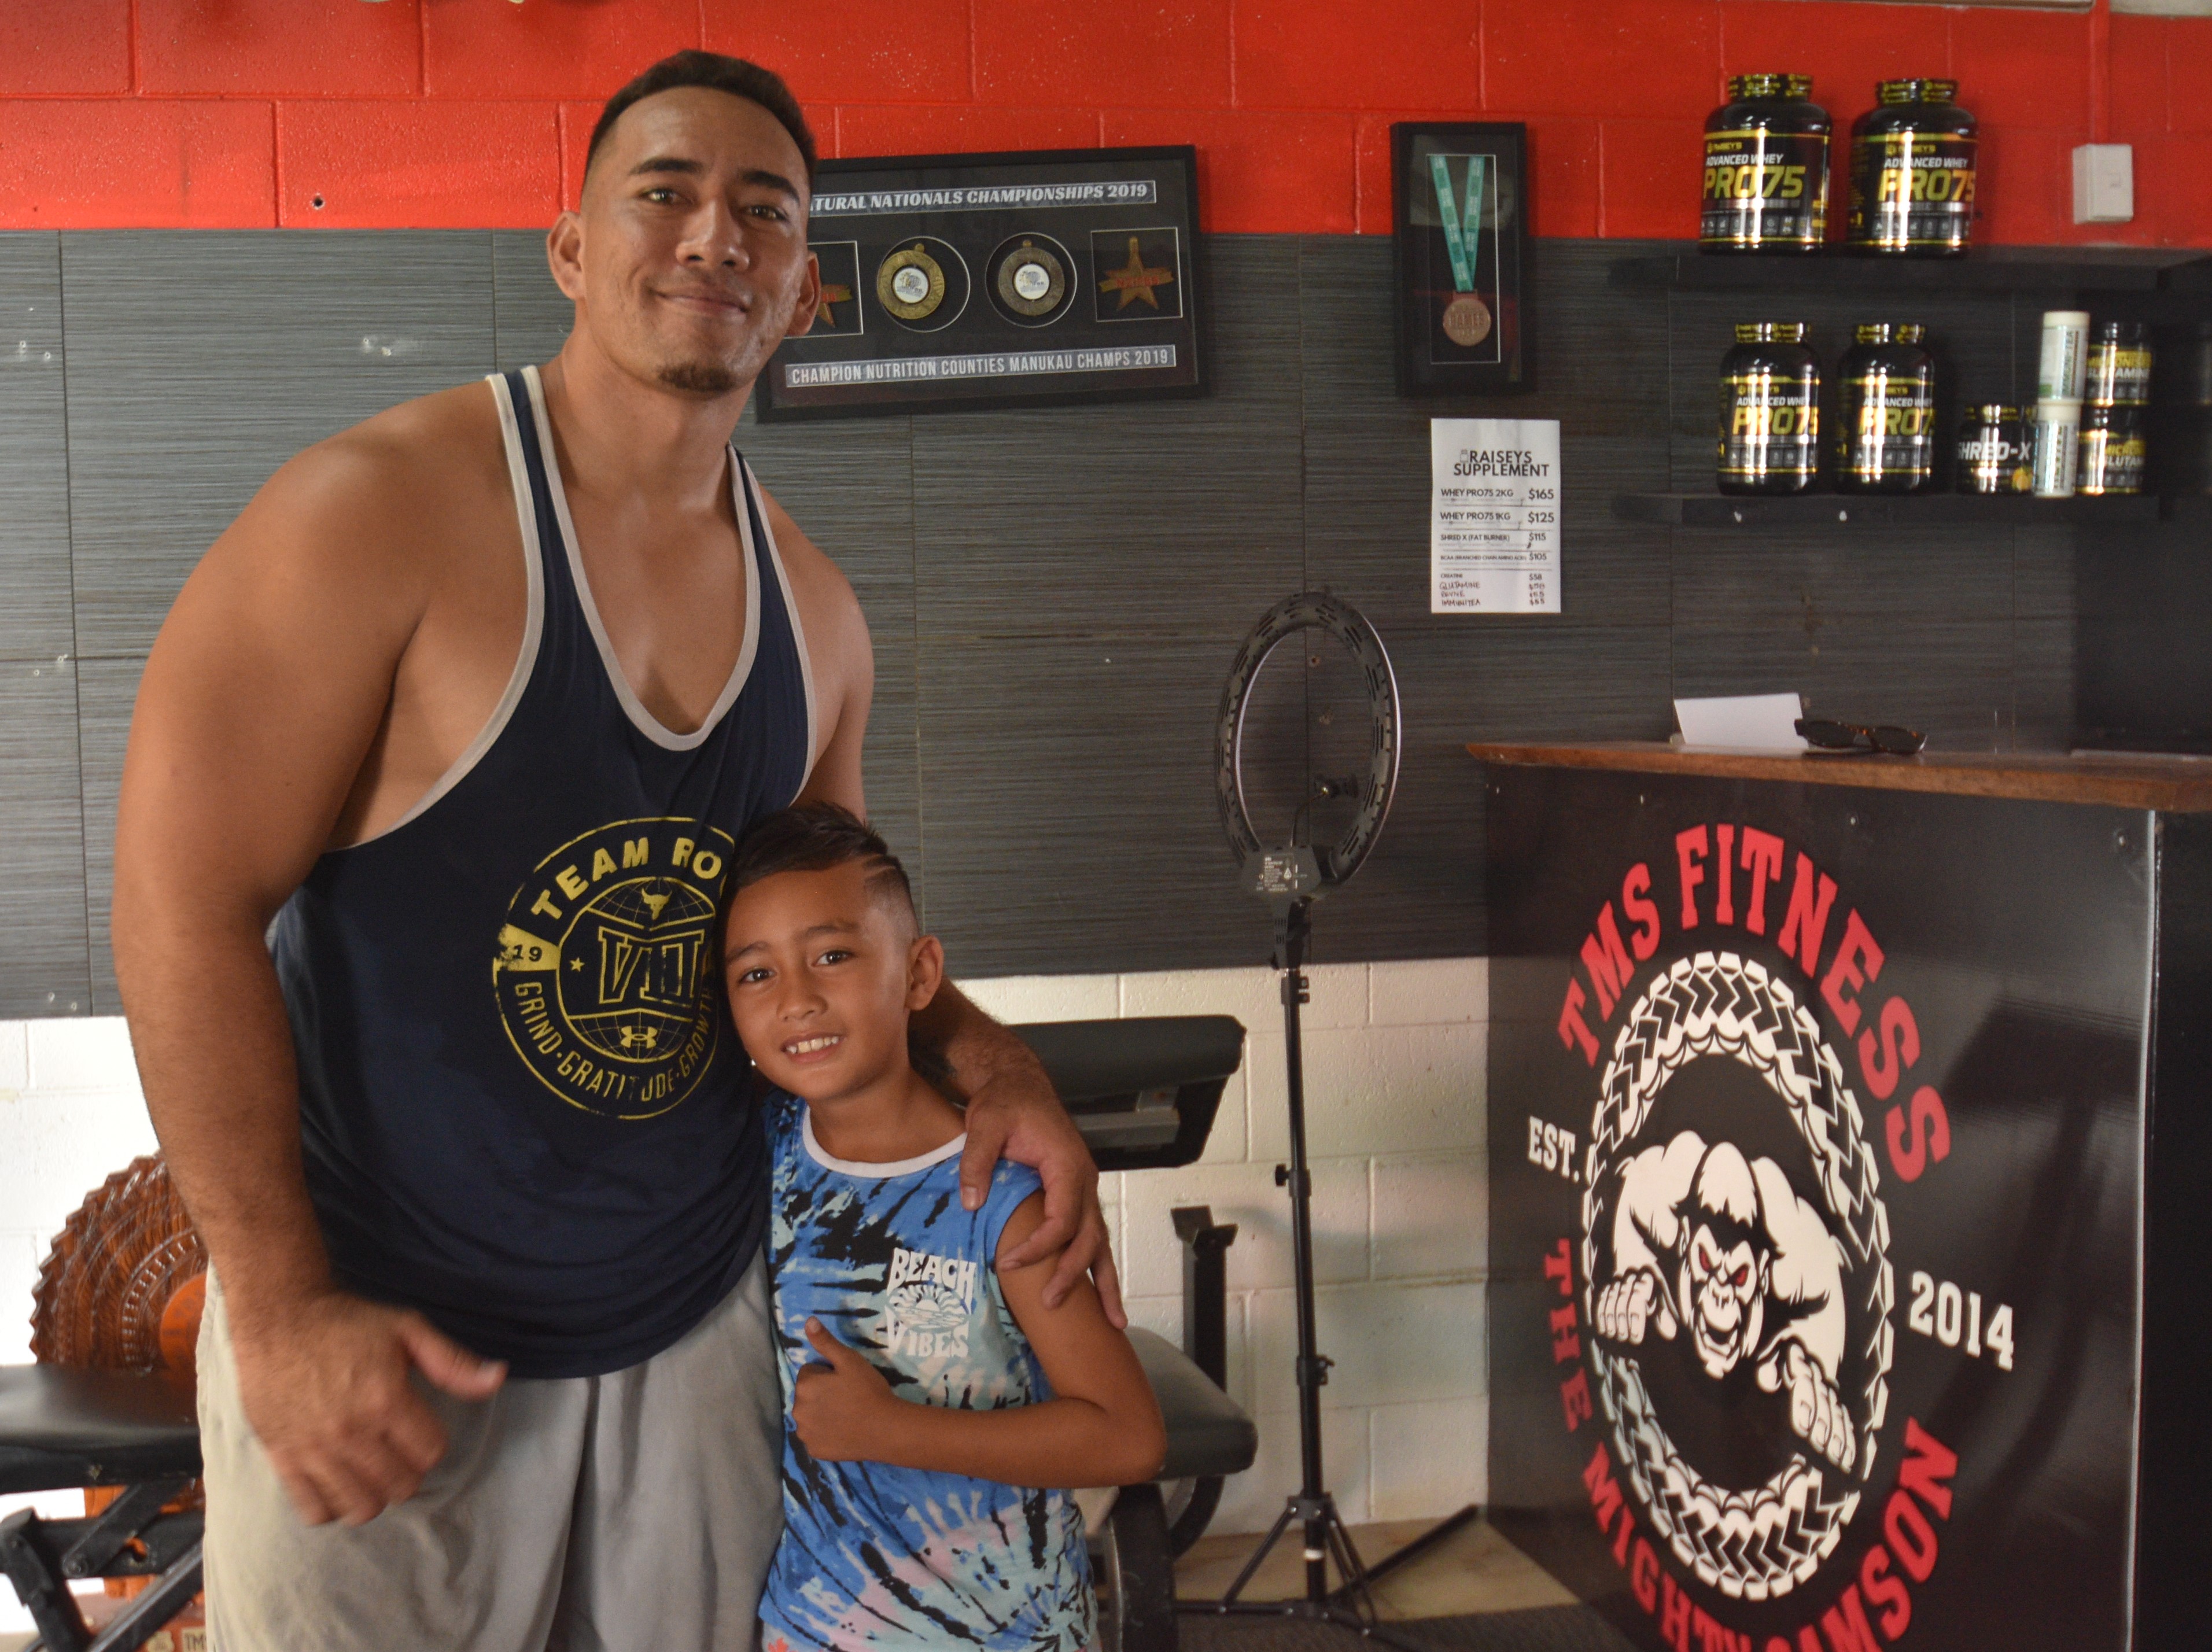 Following in dad’s footsteps: Tamaiti-Phareily ready for Te Mire Ura debut